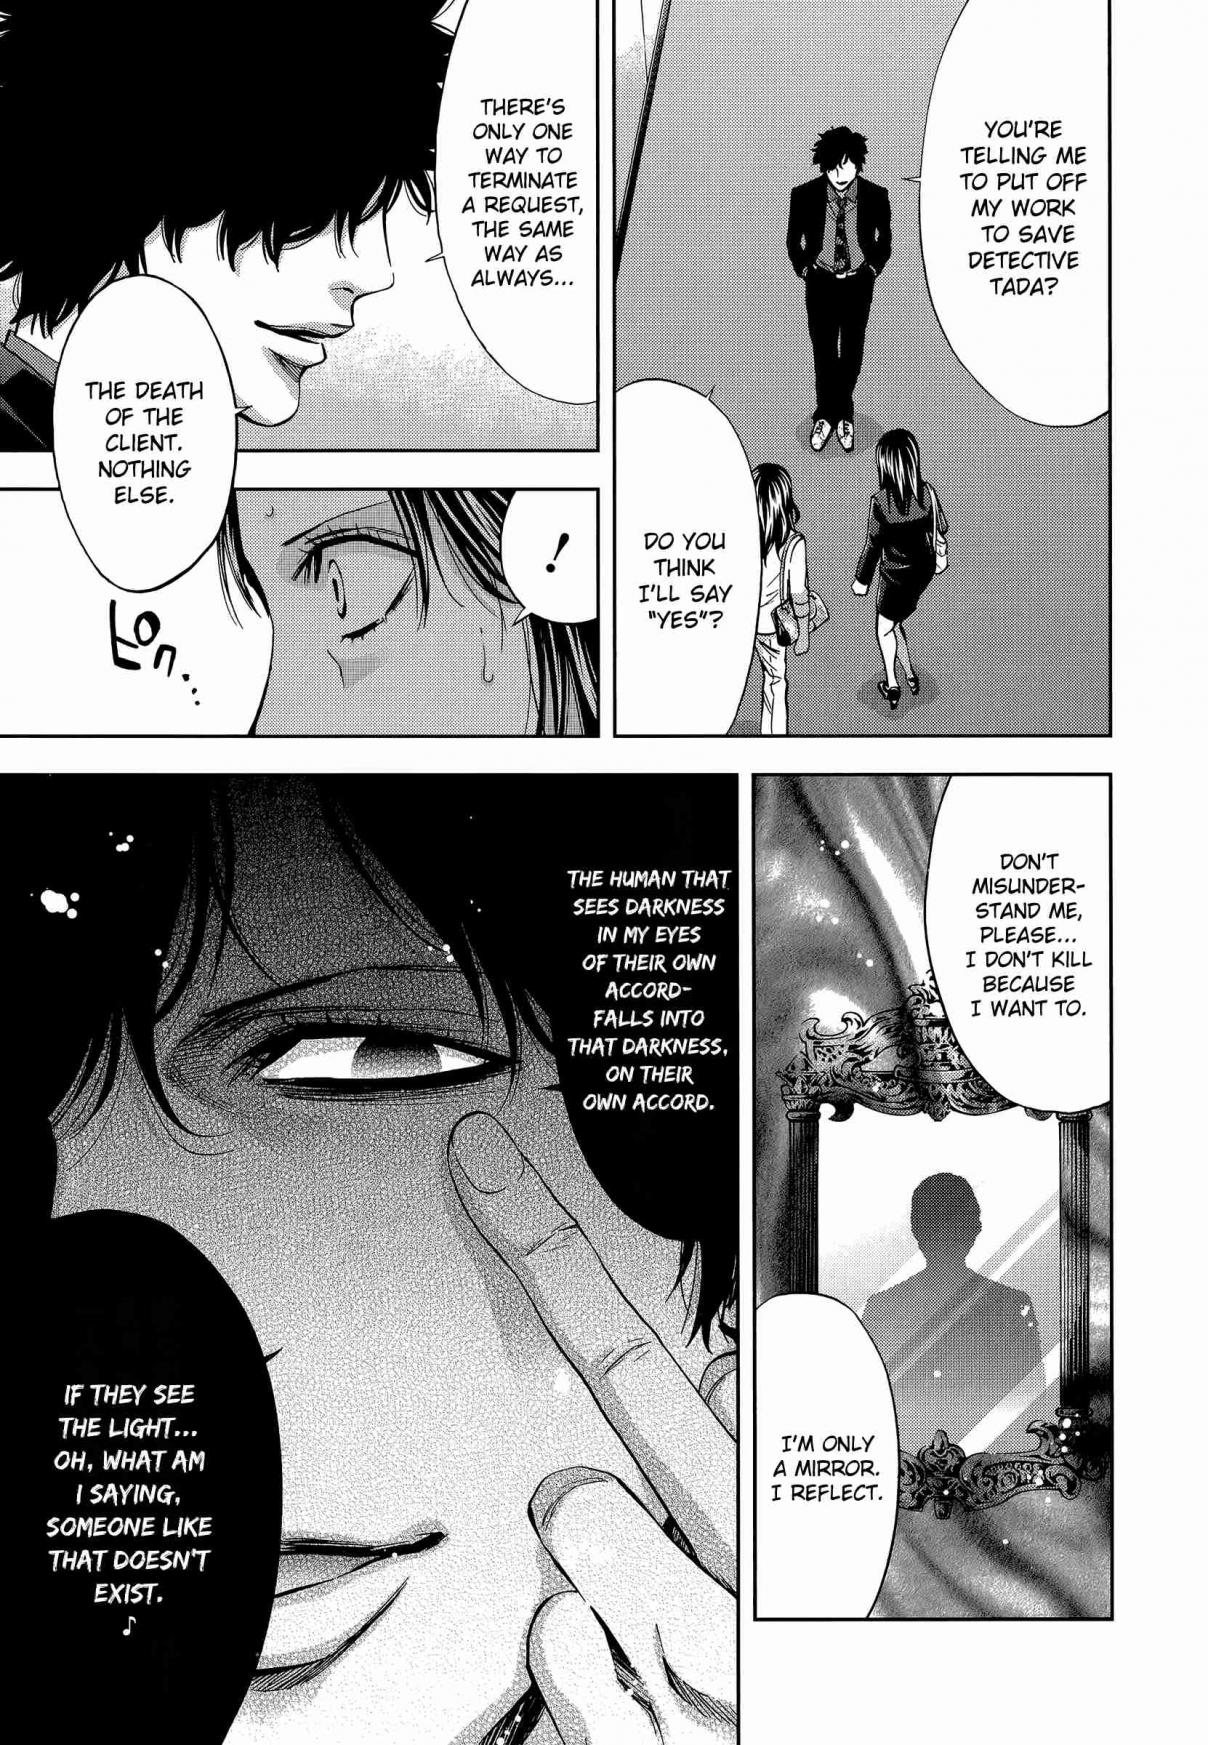 Funouhan Vol. 5 Ch. 30 Prepared for Revenge (Part 3/3)